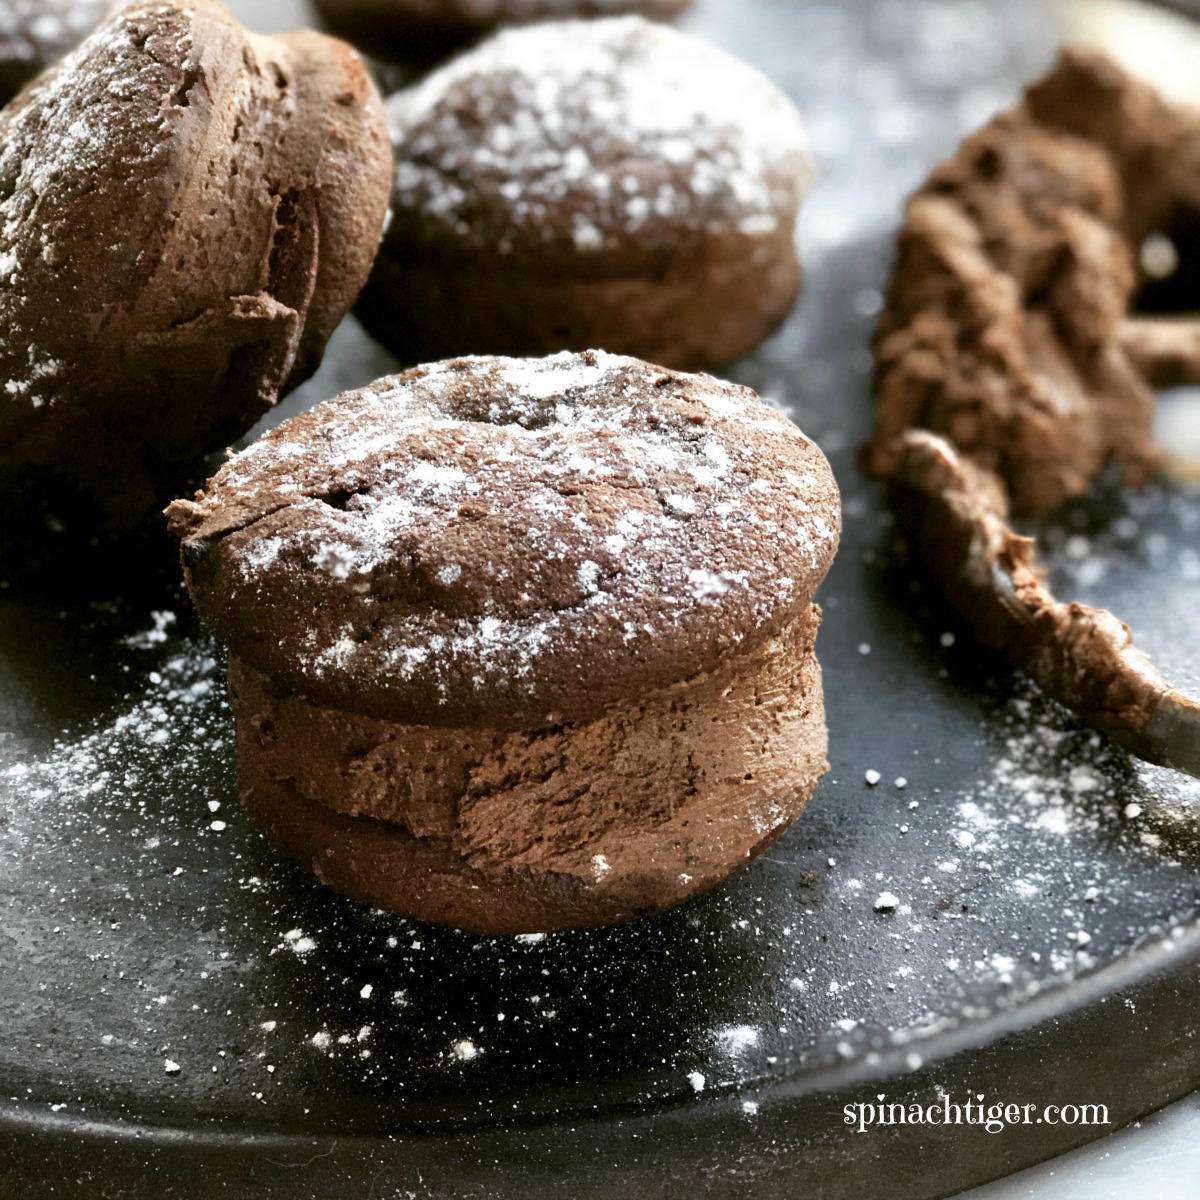 Grain Free Chocolate Whoopie Pies, Keto Friendly, Sugar Free from Spinach Tiger